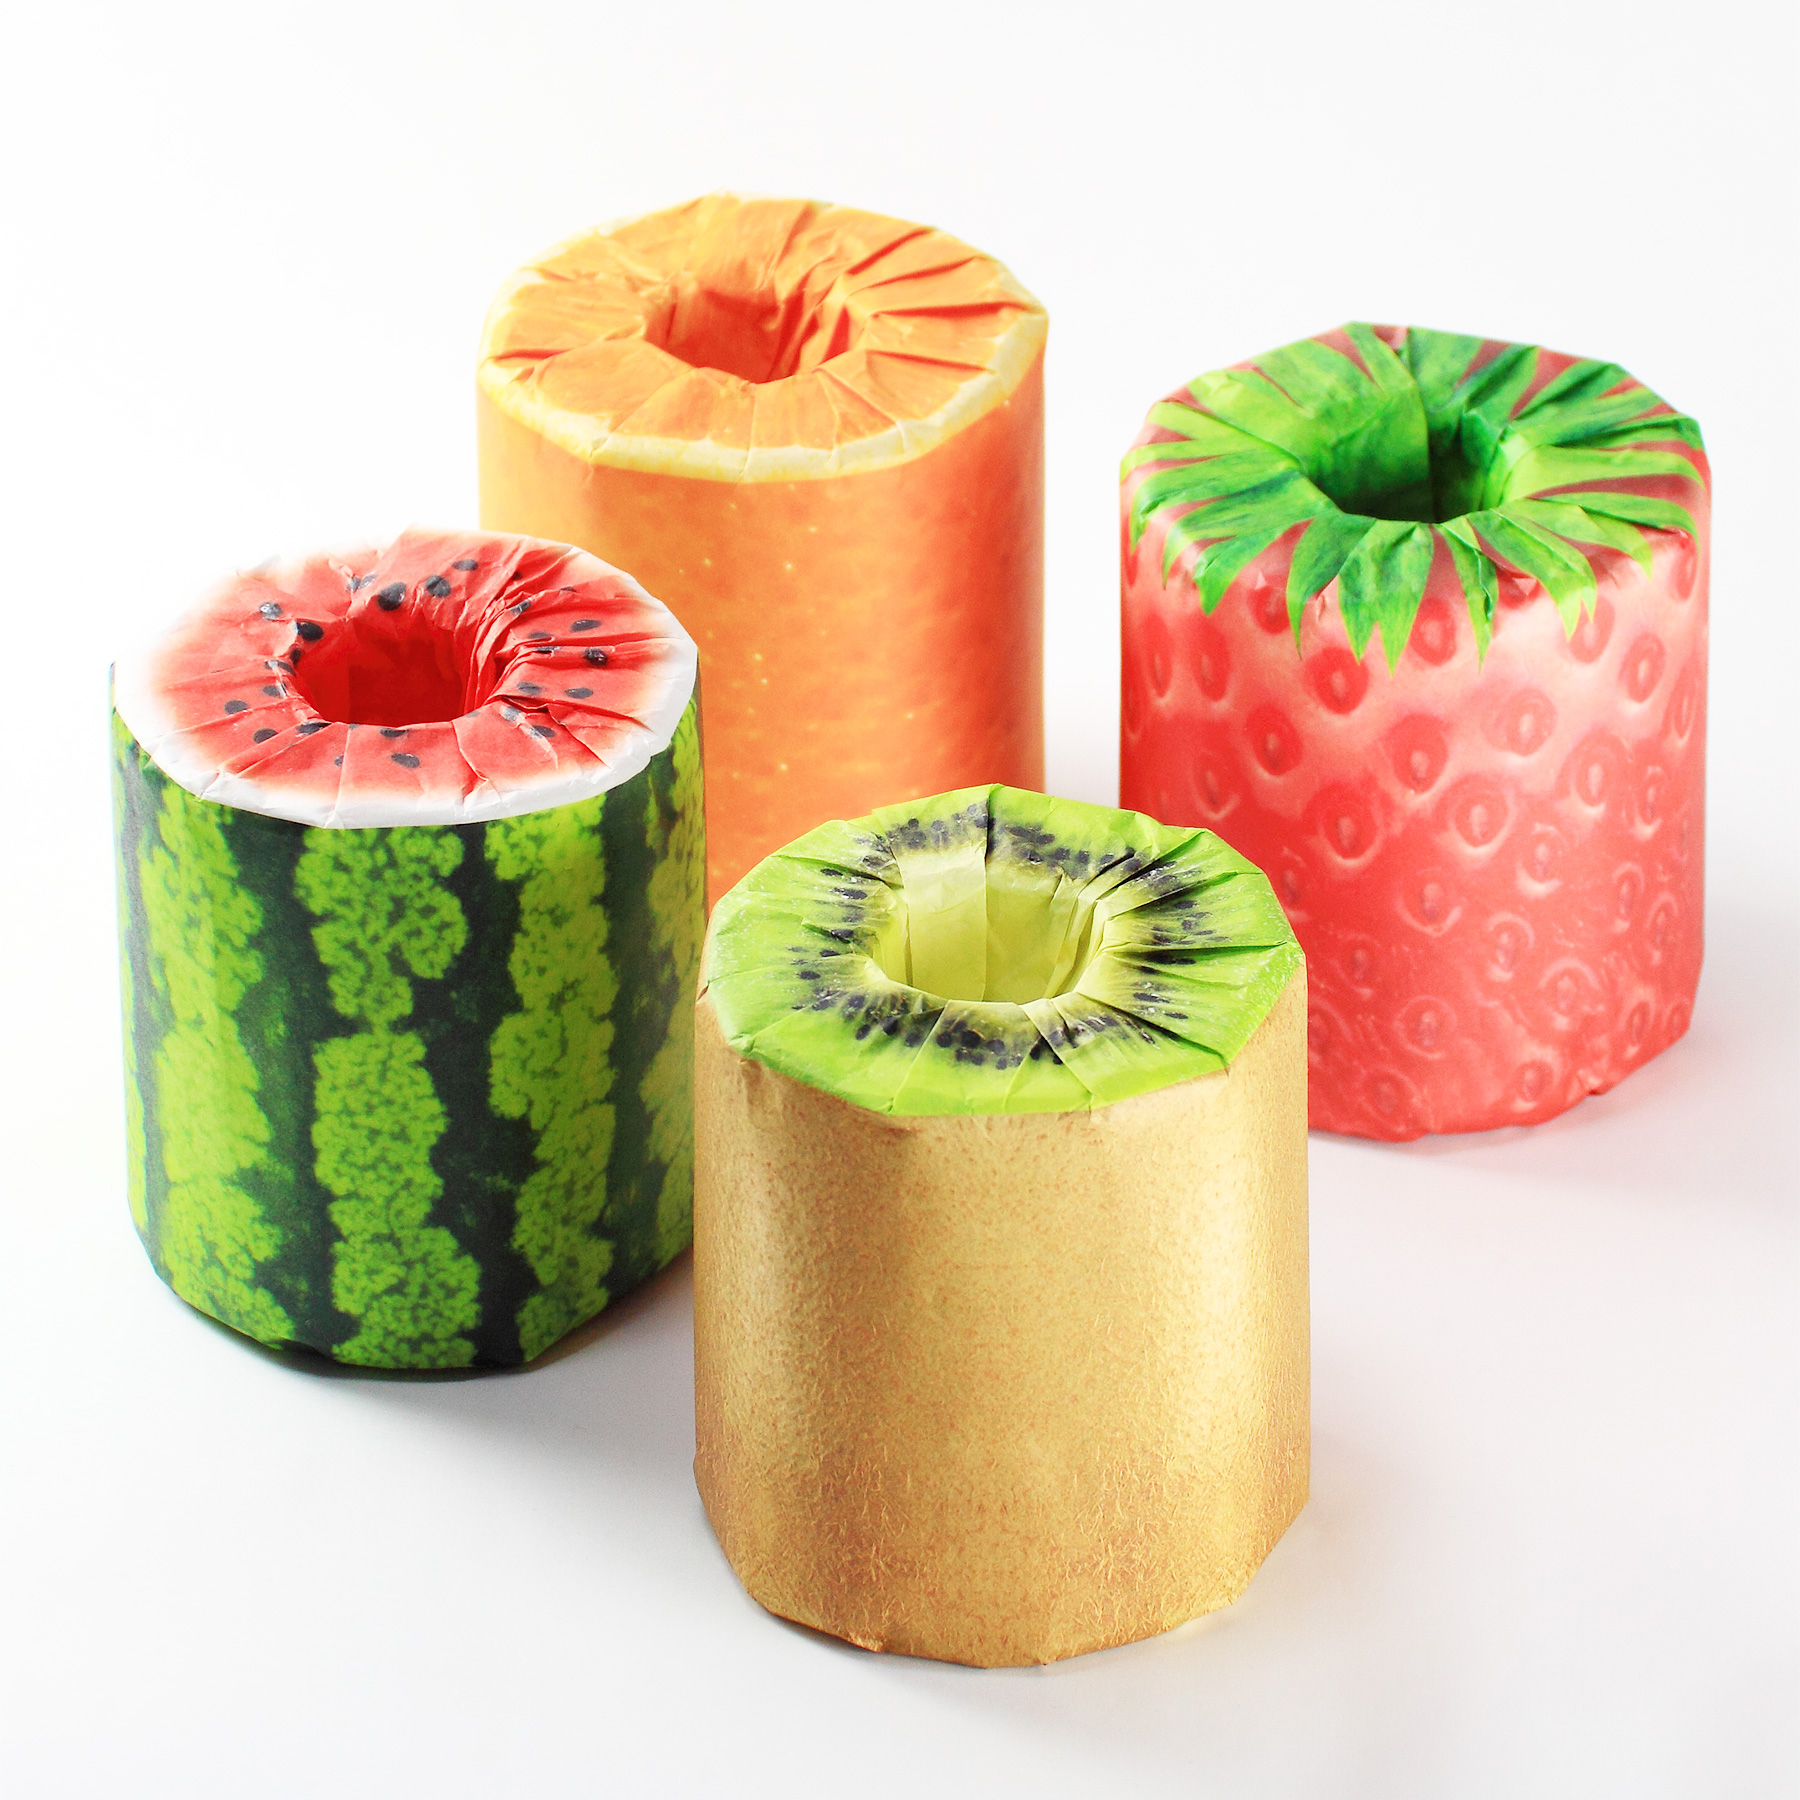 The Fruits Toilet Paper Packaging